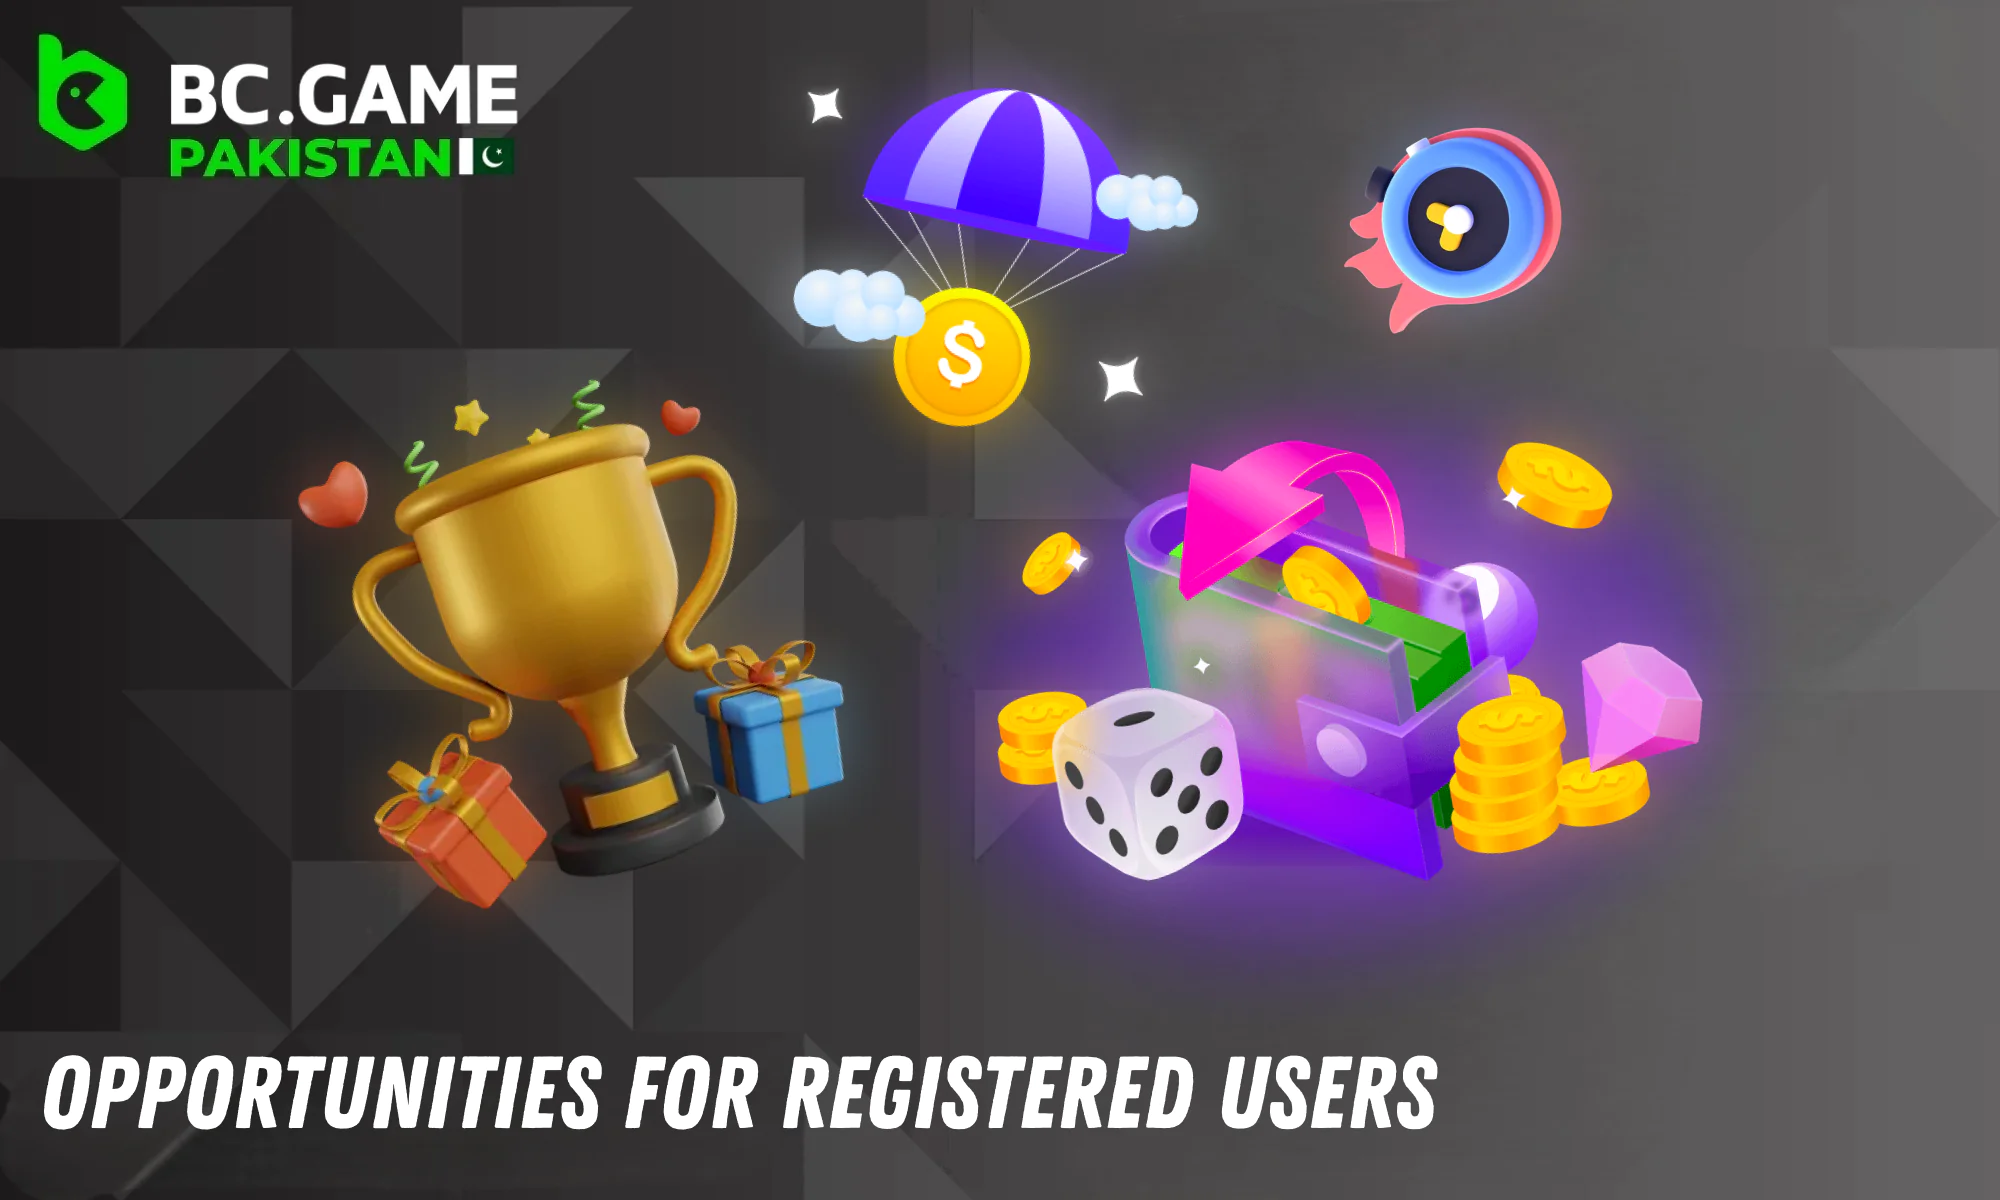 Registered BC Game users have access to a wide range of opportunities